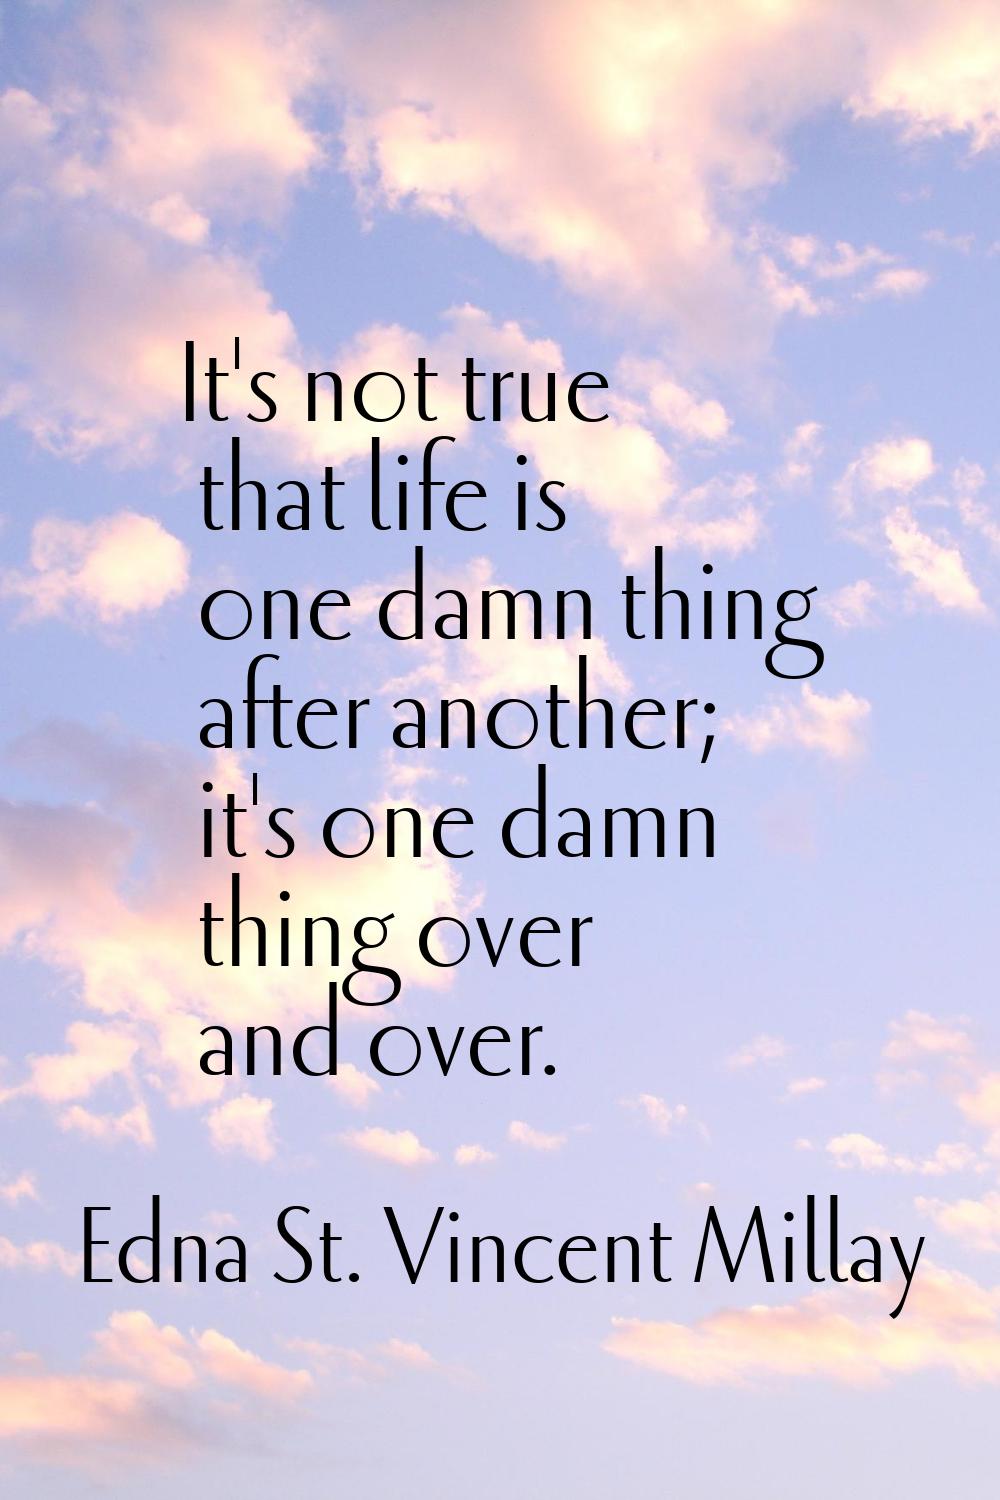 It's not true that life is one damn thing after another; it's one damn thing over and over.